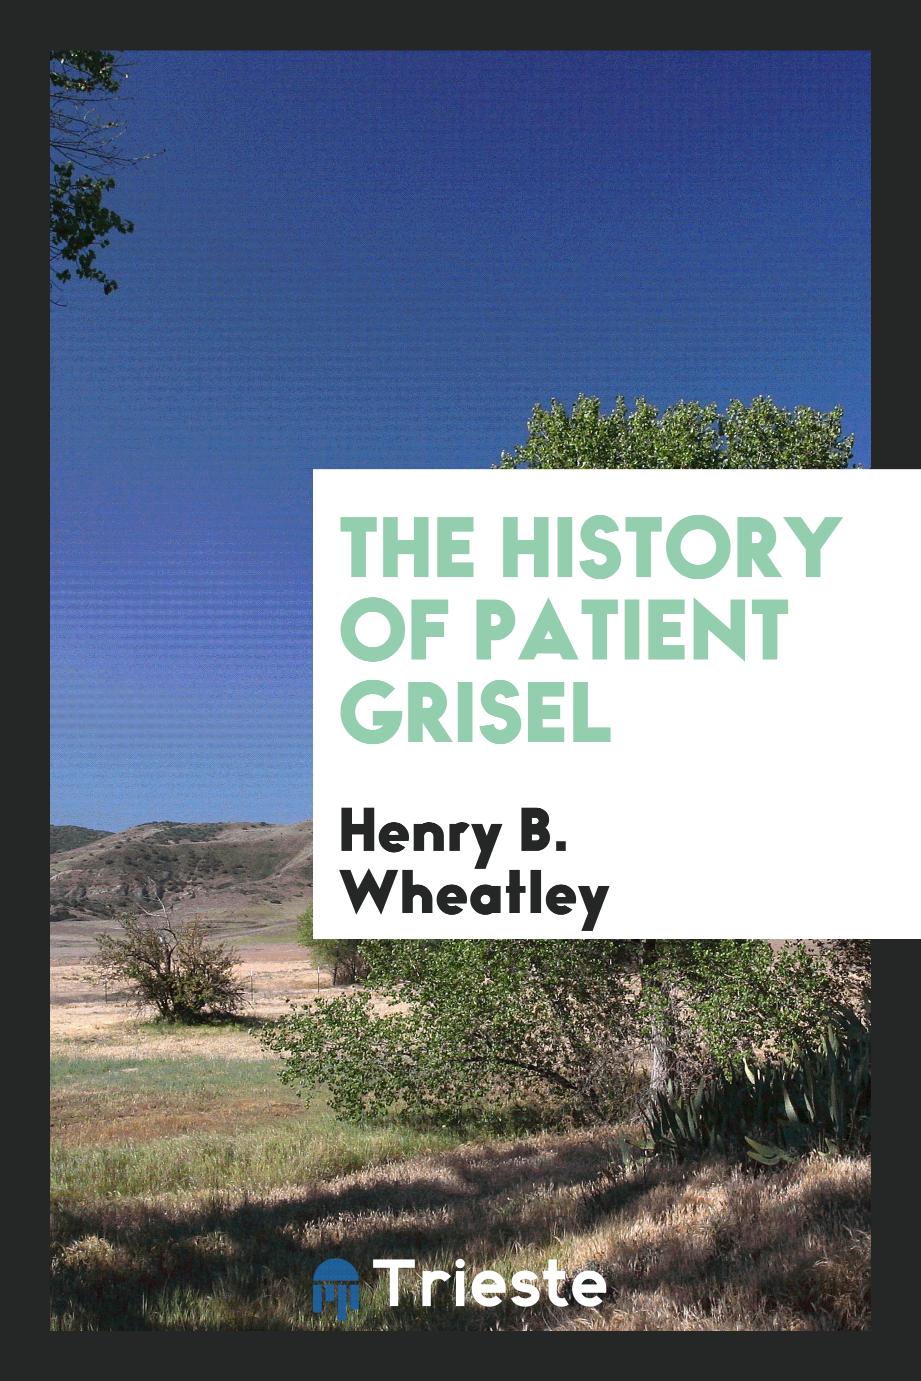 The History of Patient Grisel